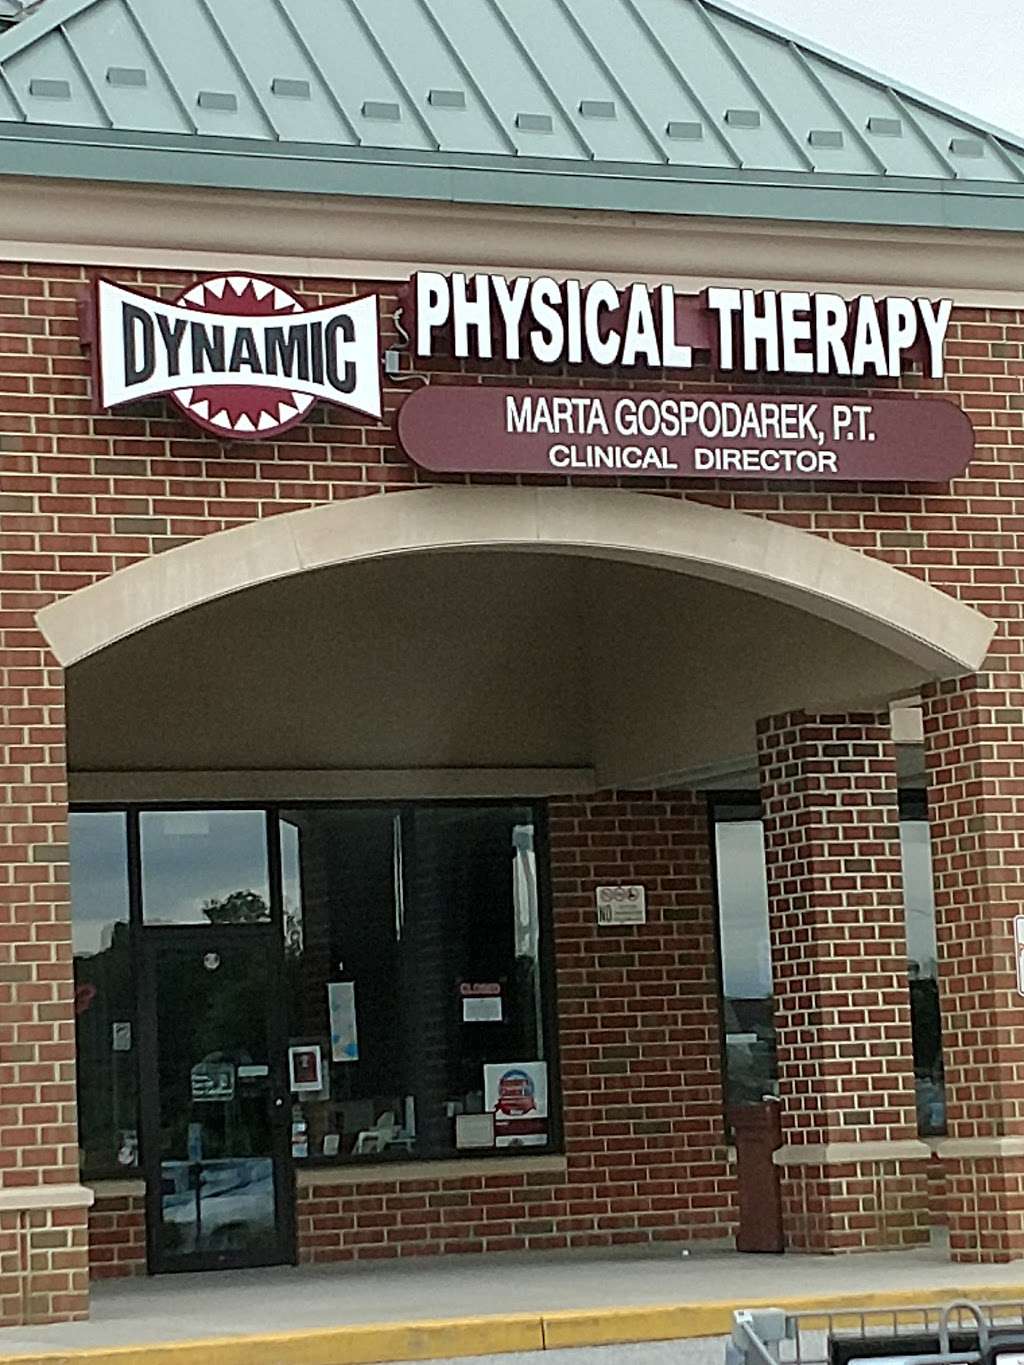 Pivot Physical Therapy | 432 E Main St, Middletown, DE 19709, USA | Phone: (302) 376-4315